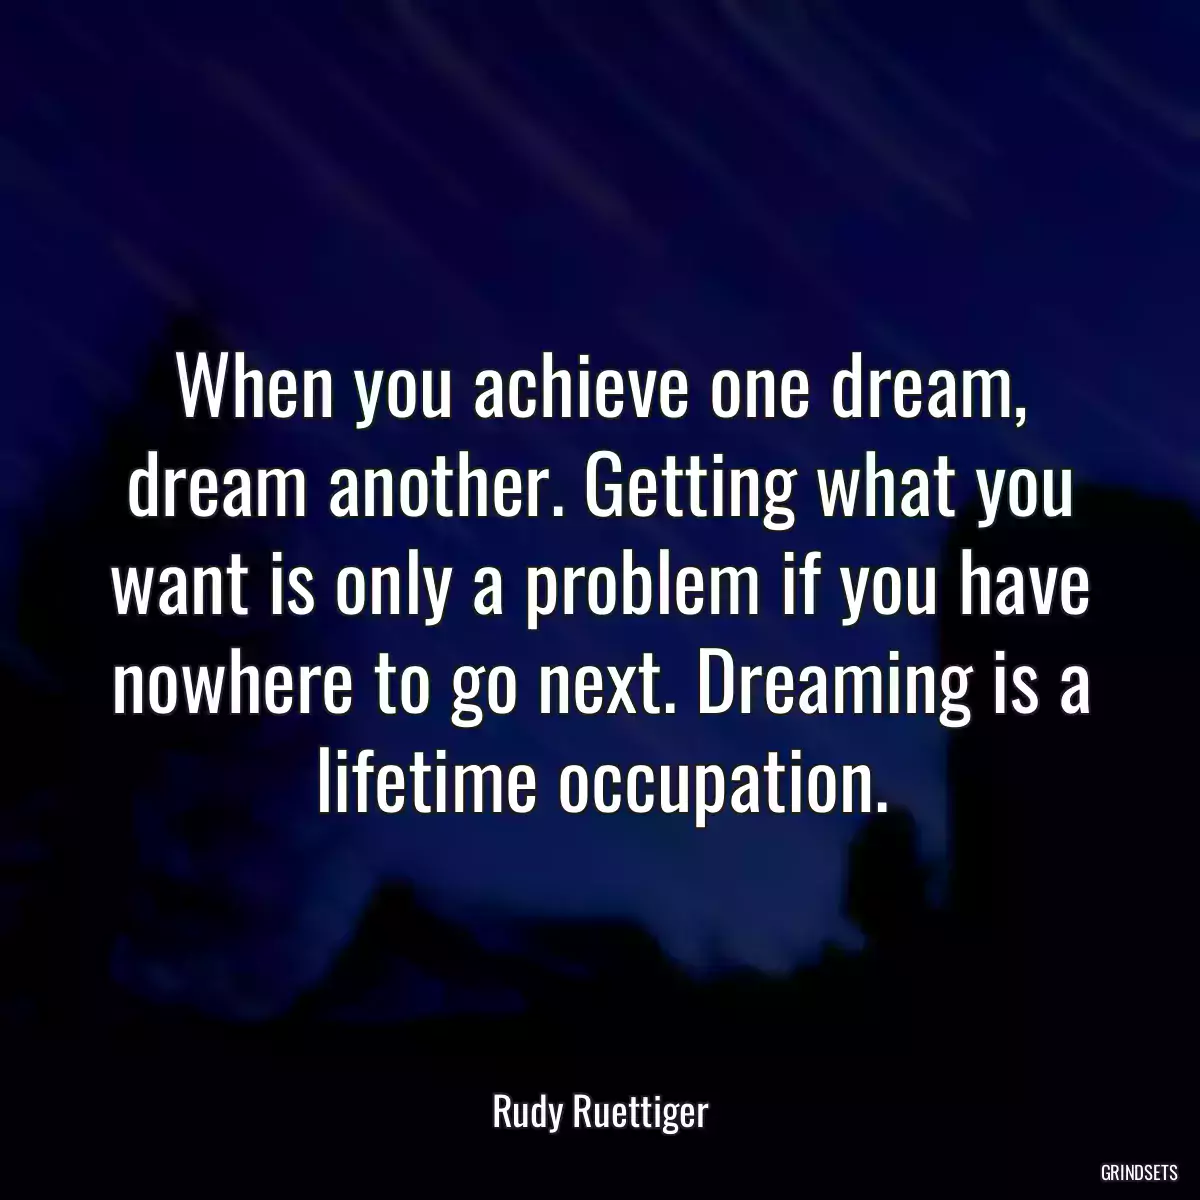 When you achieve one dream, dream another. Getting what you want is only a problem if you have nowhere to go next. Dreaming is a lifetime occupation.